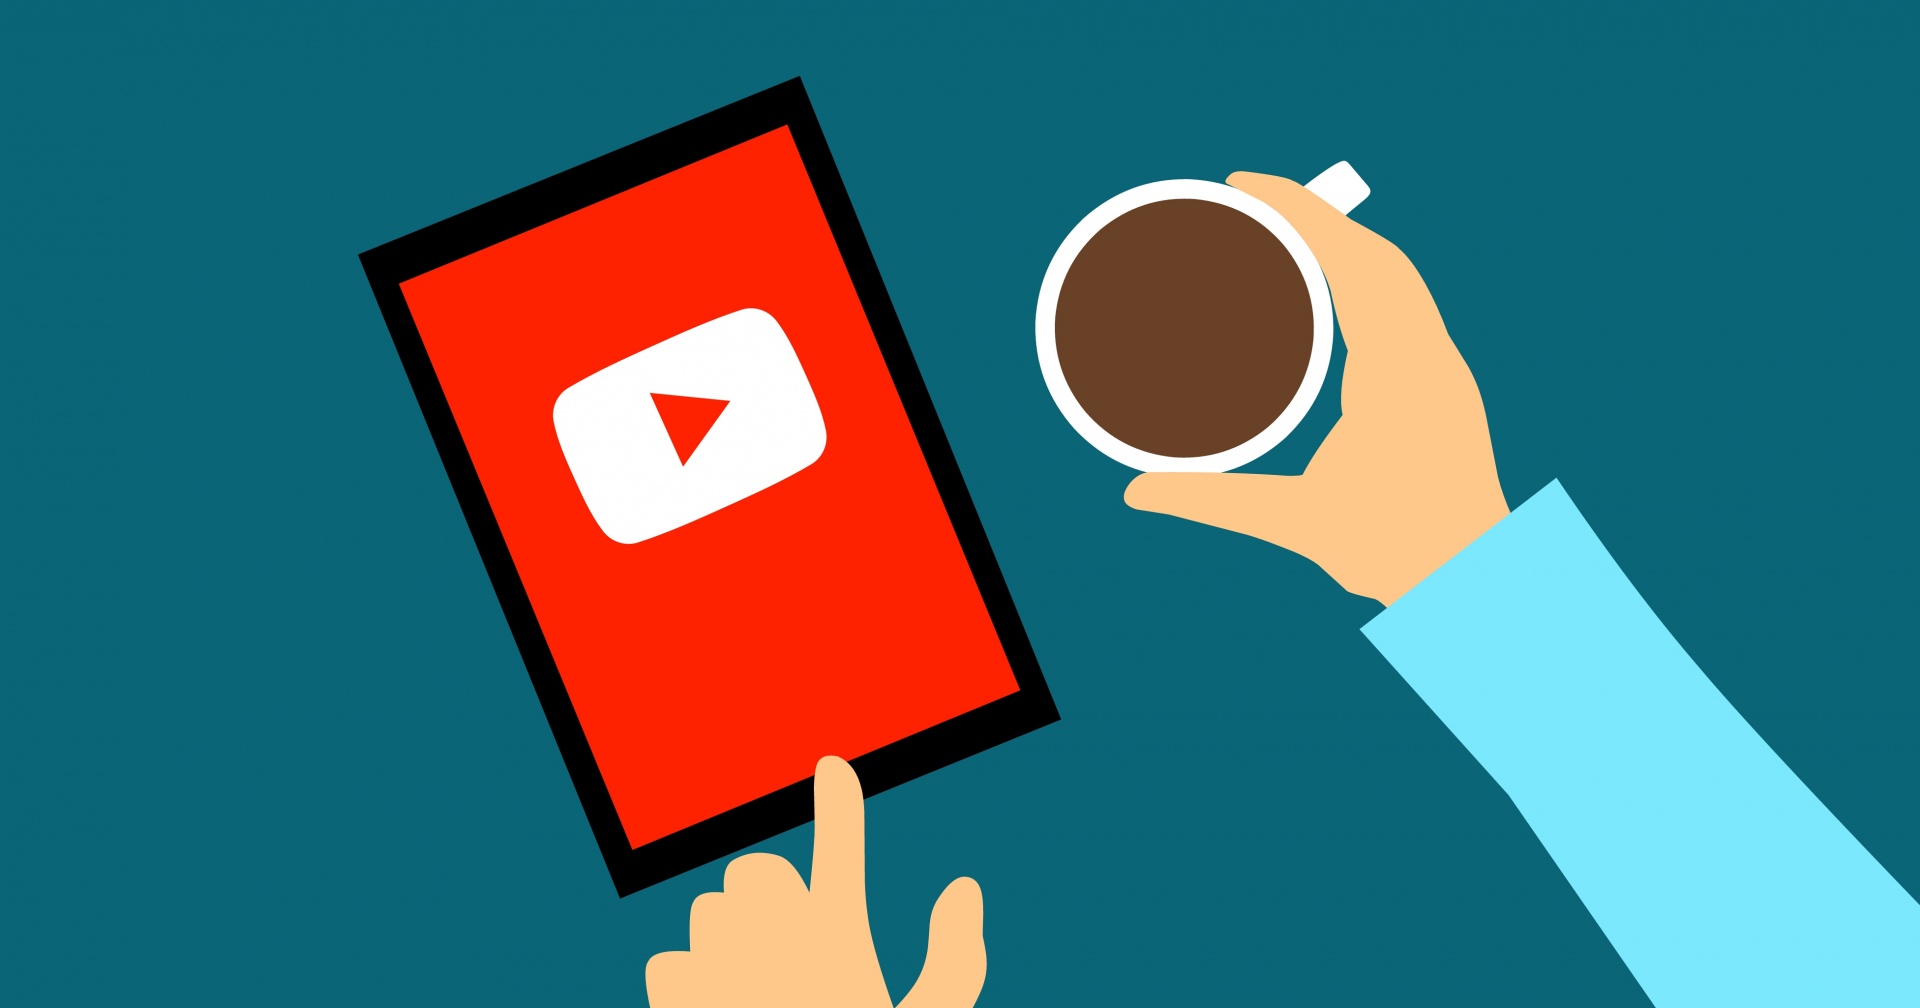 YouTube to remove "medically unsubstantiated"  content